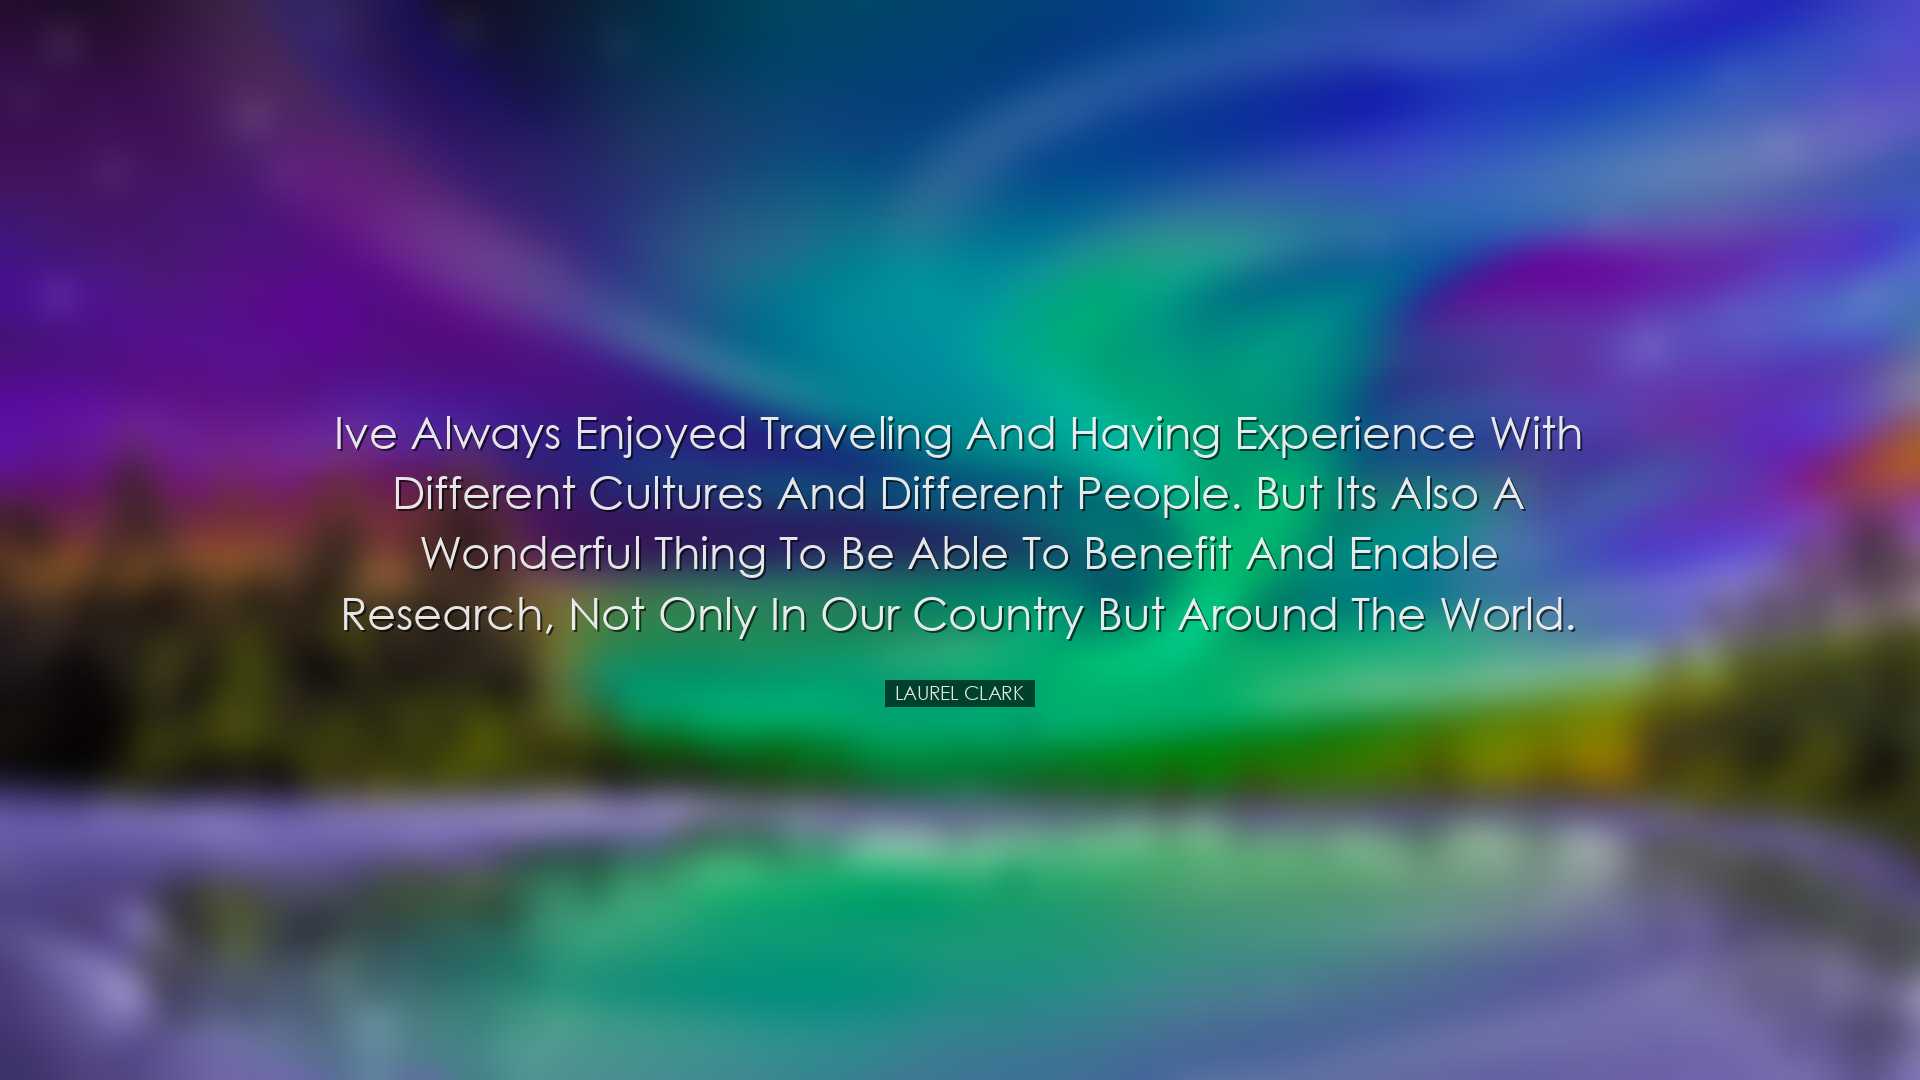 Ive always enjoyed traveling and having experience with different